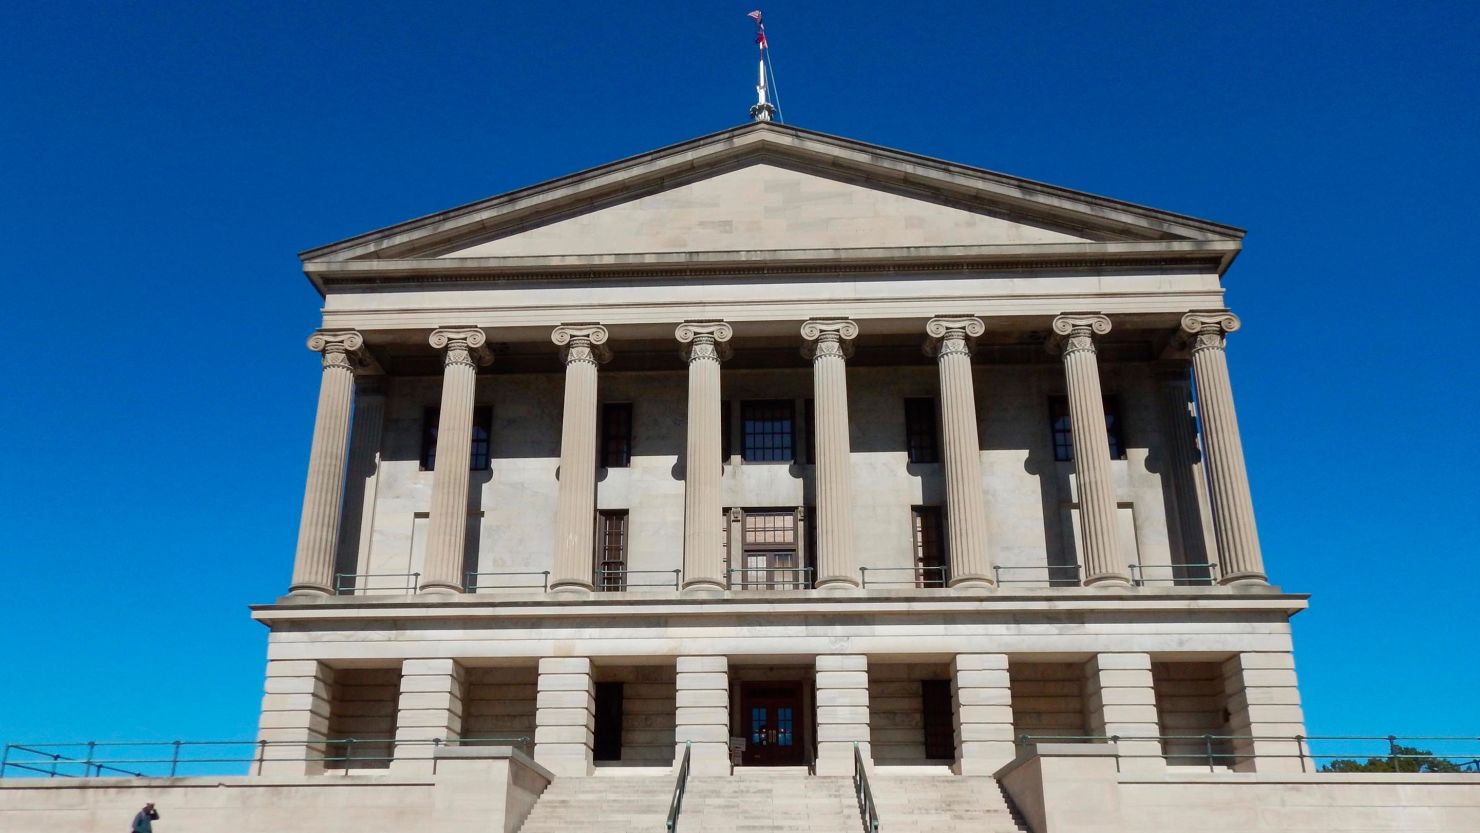 The Tennessee State Capitol in Nashville is seen in this file photo.